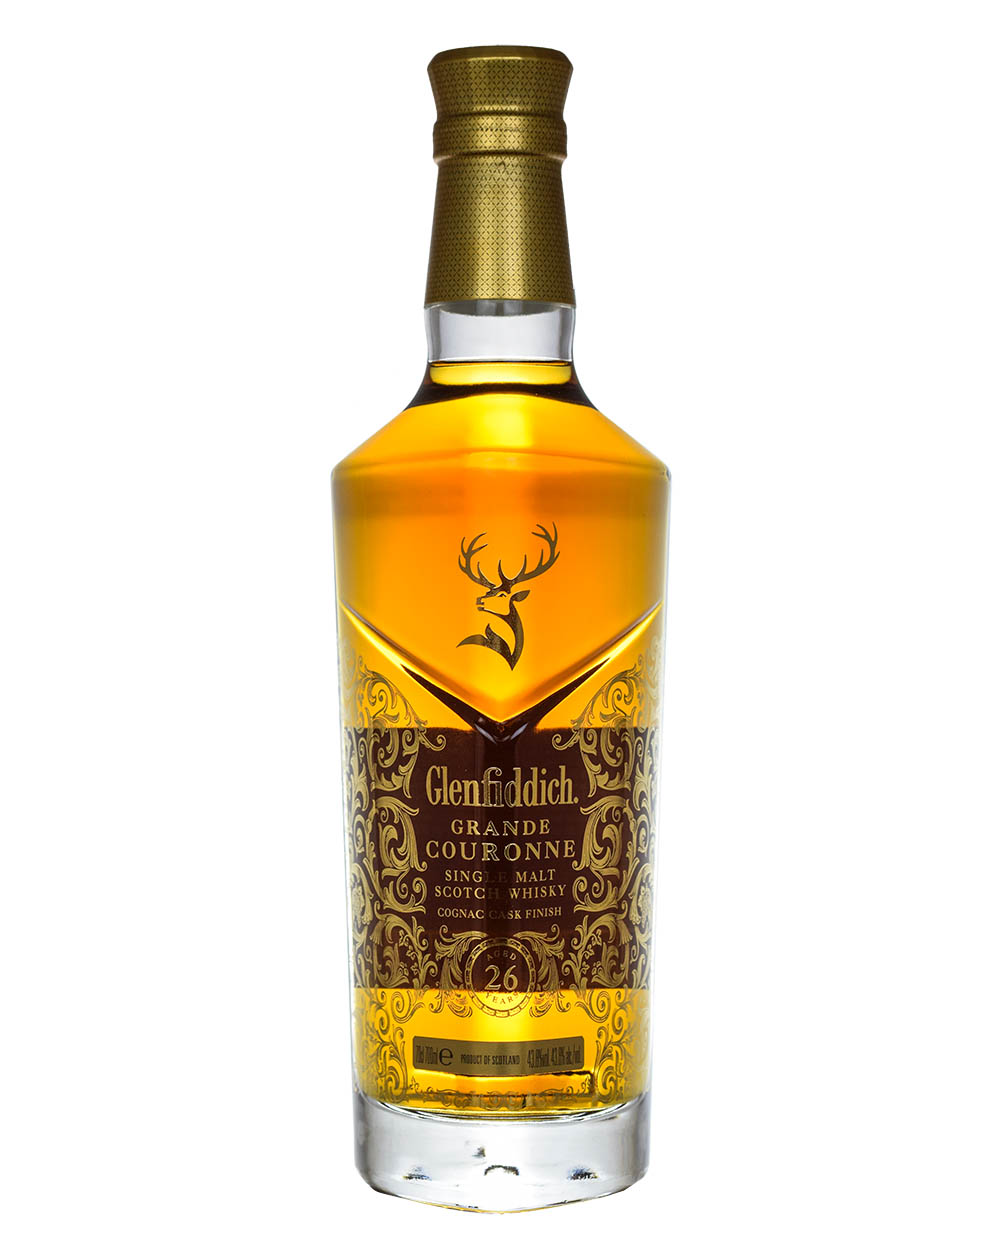 Glenfiddich Grande Couronne 26 Years Old Musthave Malts MHM